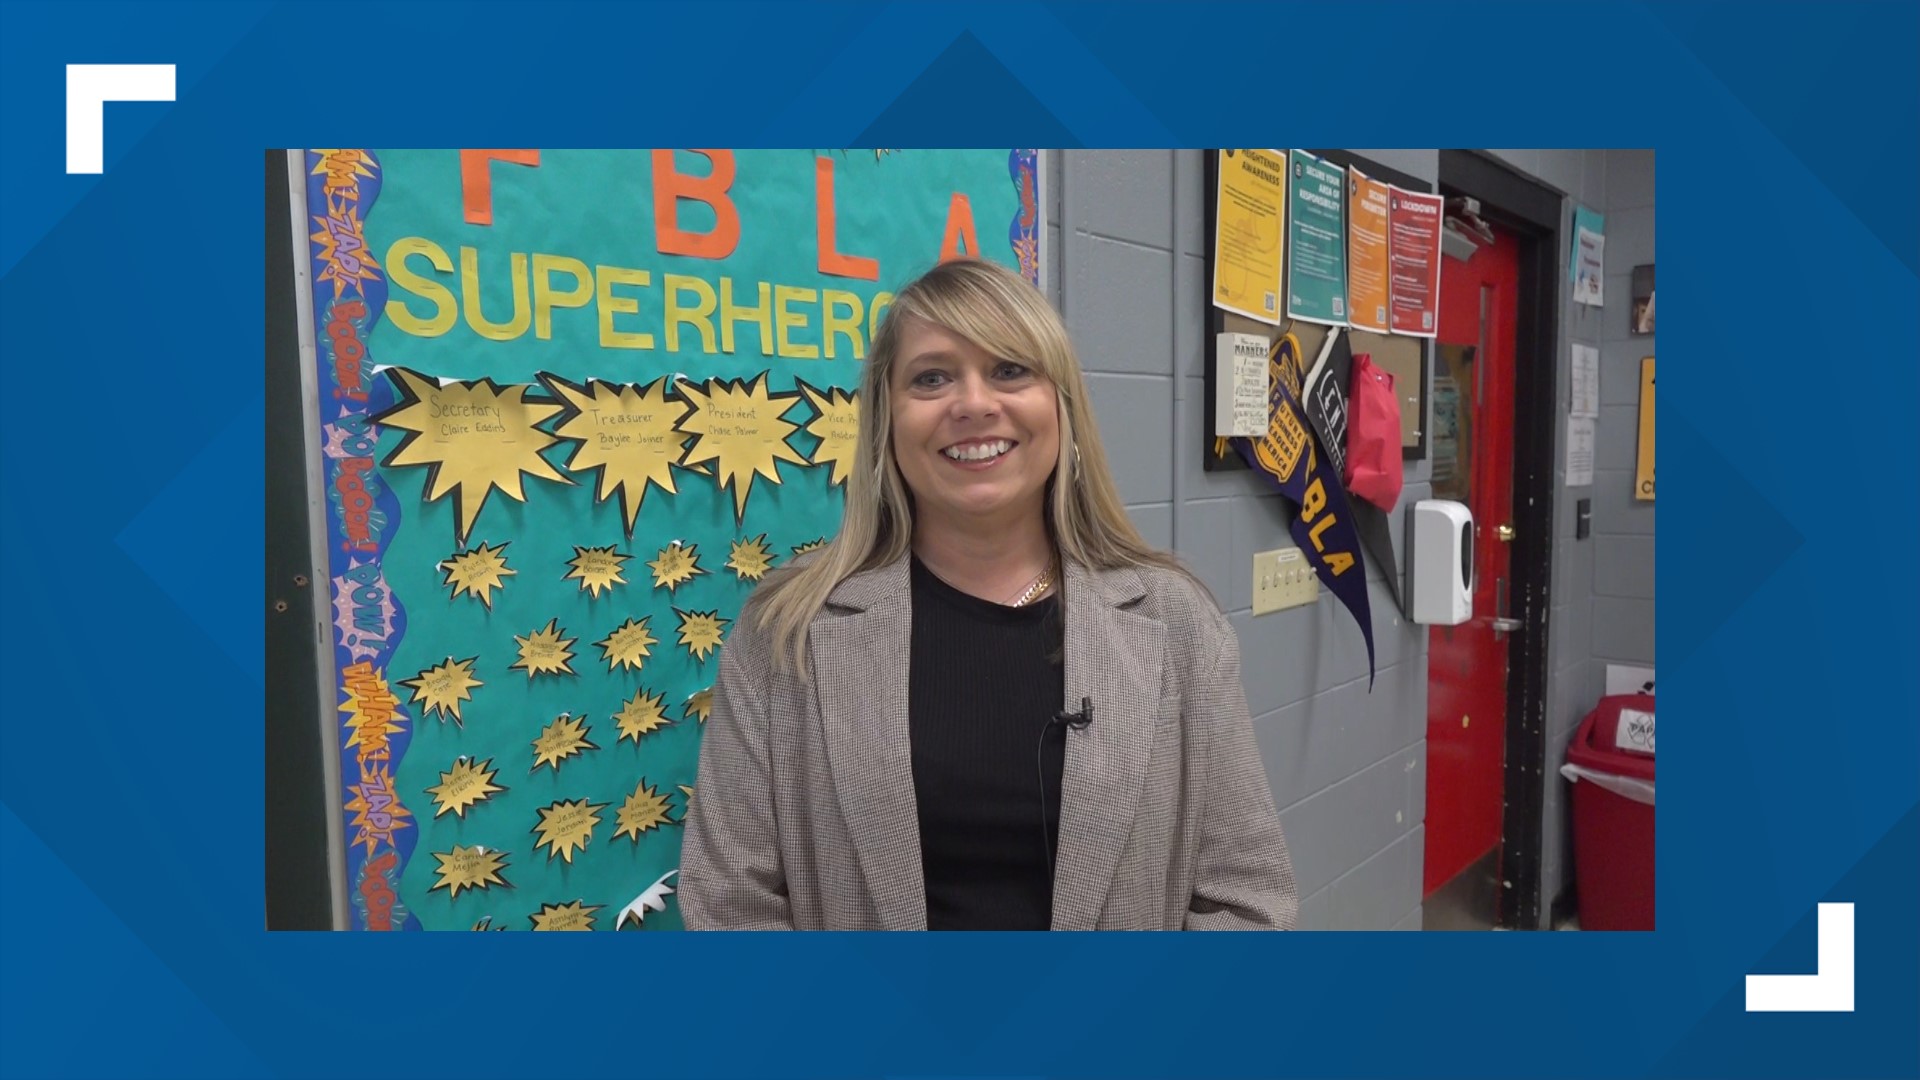 Nena Dial of Central High School in Florence is this week's Valley's Top Teacher!